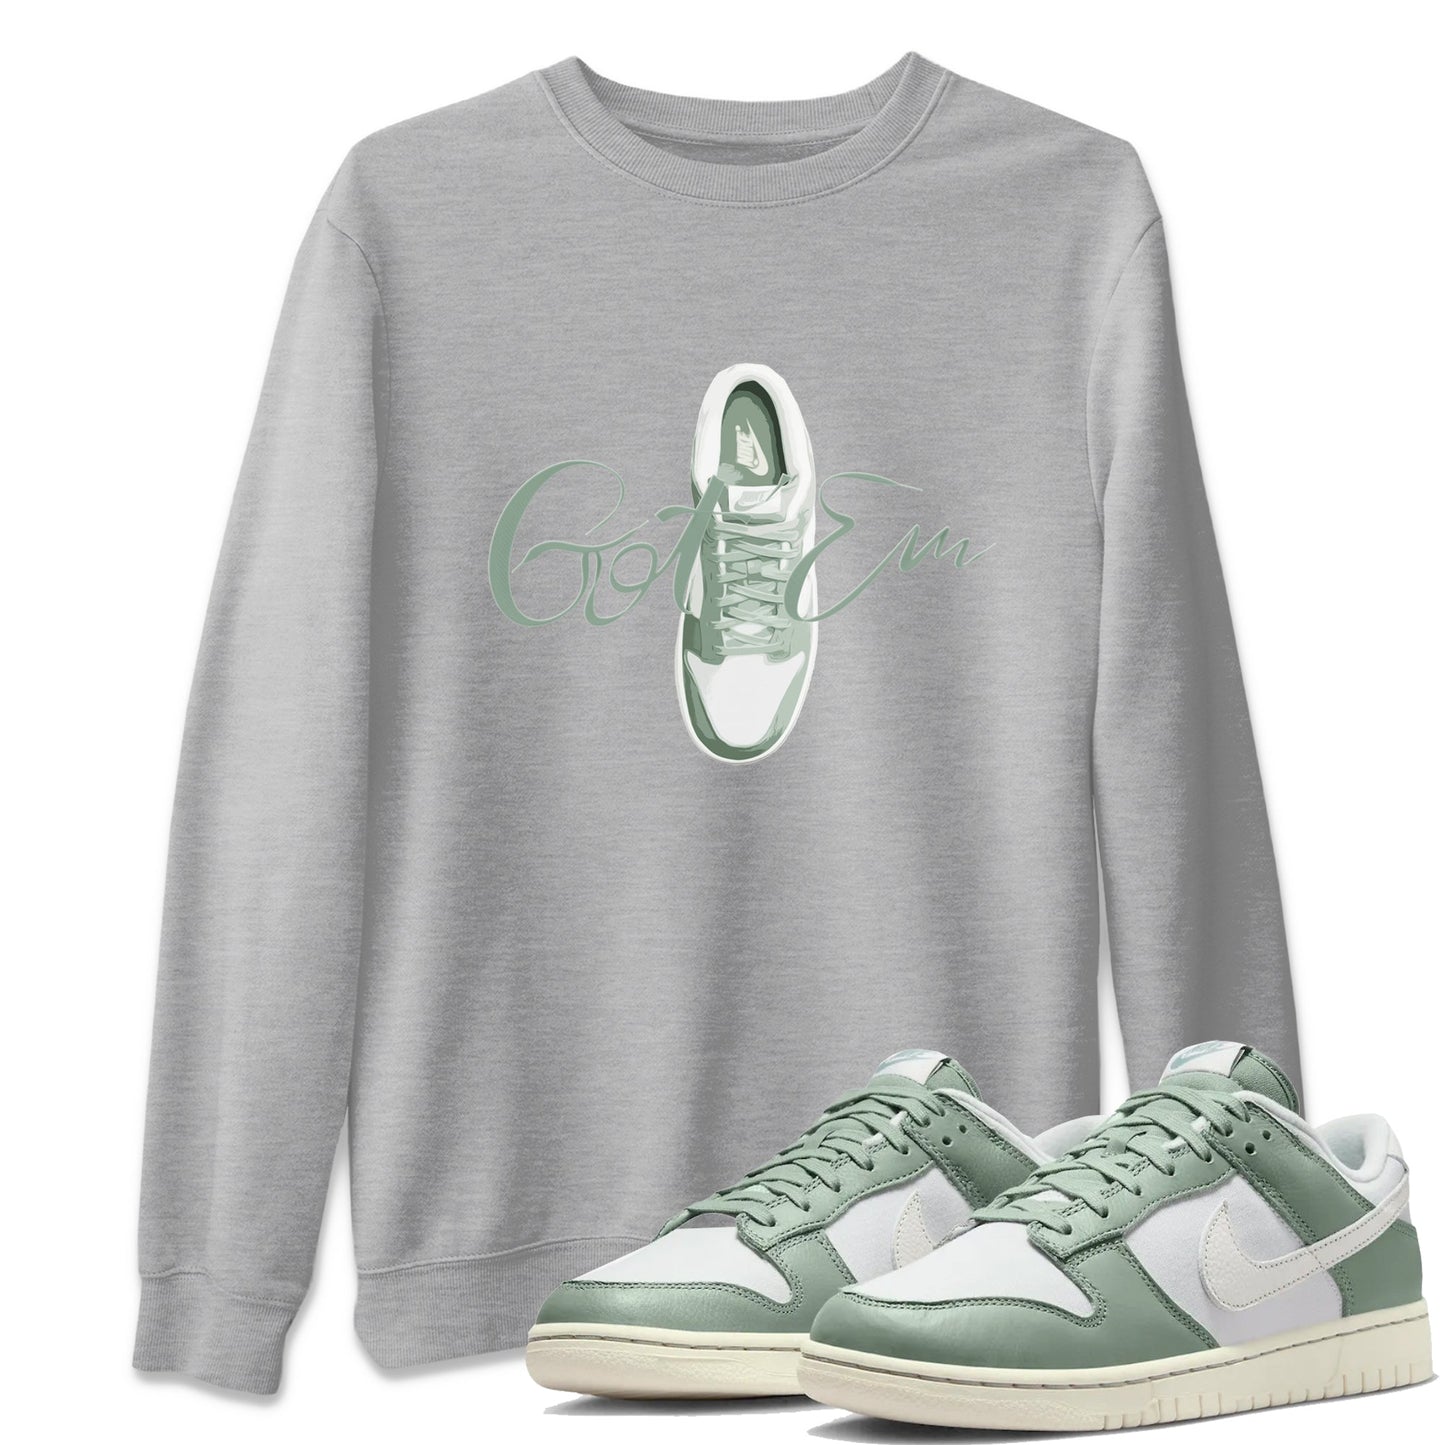 Dunk Mica Green Sneaker Match Tees Caligraphy Shoe Lace Sneaker Tees Dunk Low Mica Green Sneaker Release Tees Unisex Shirts Heather Grey 1